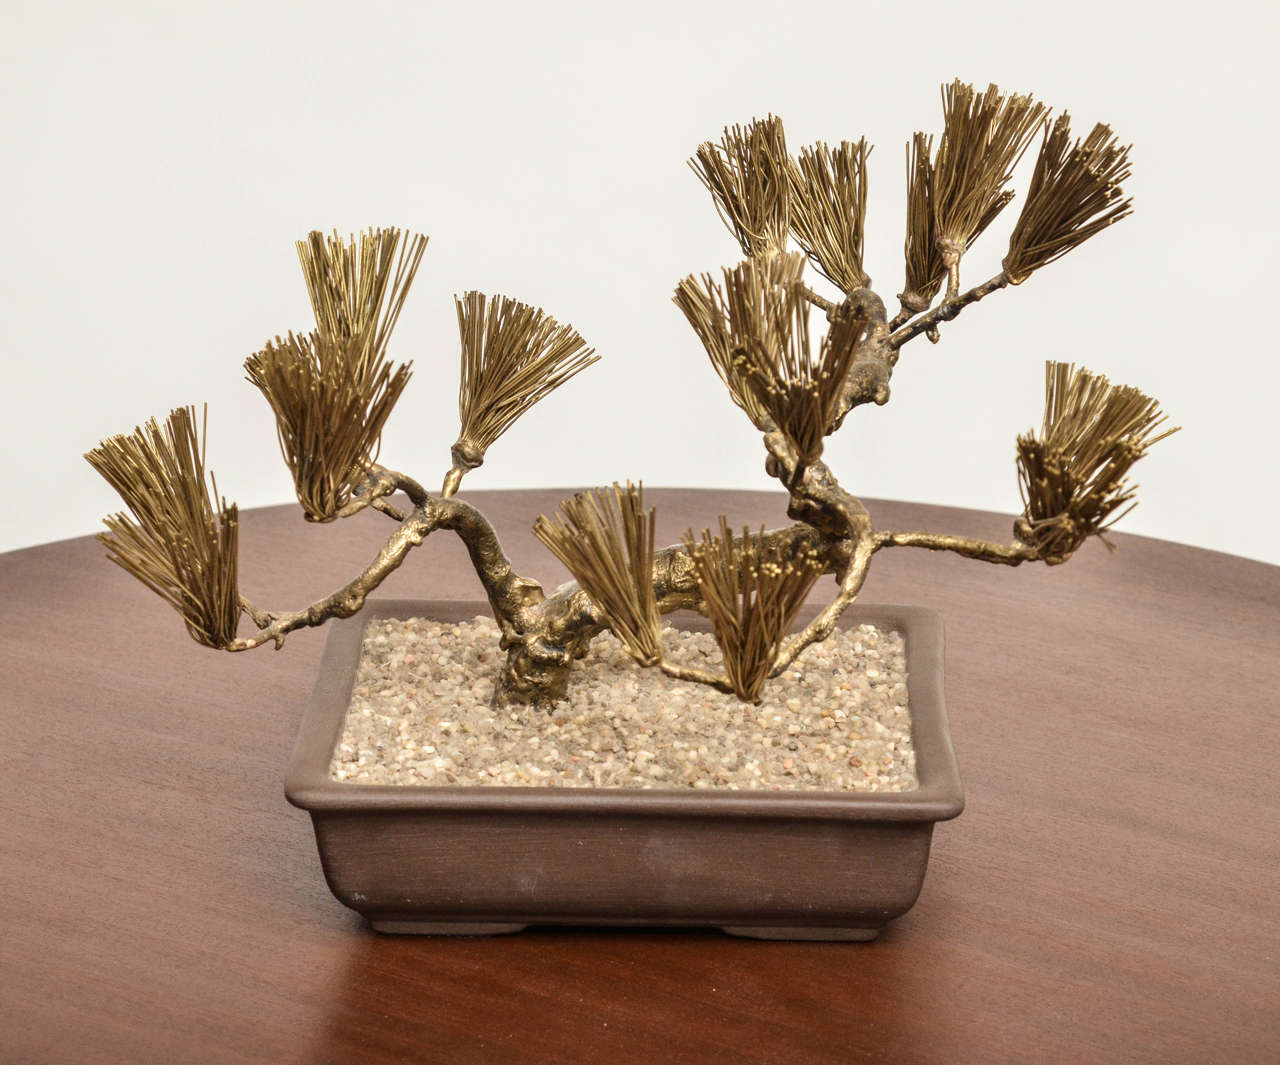 Brass Asian Bonsai Tree Form Sculpture In Excellent Condition For Sale In Bridgehampton, NY